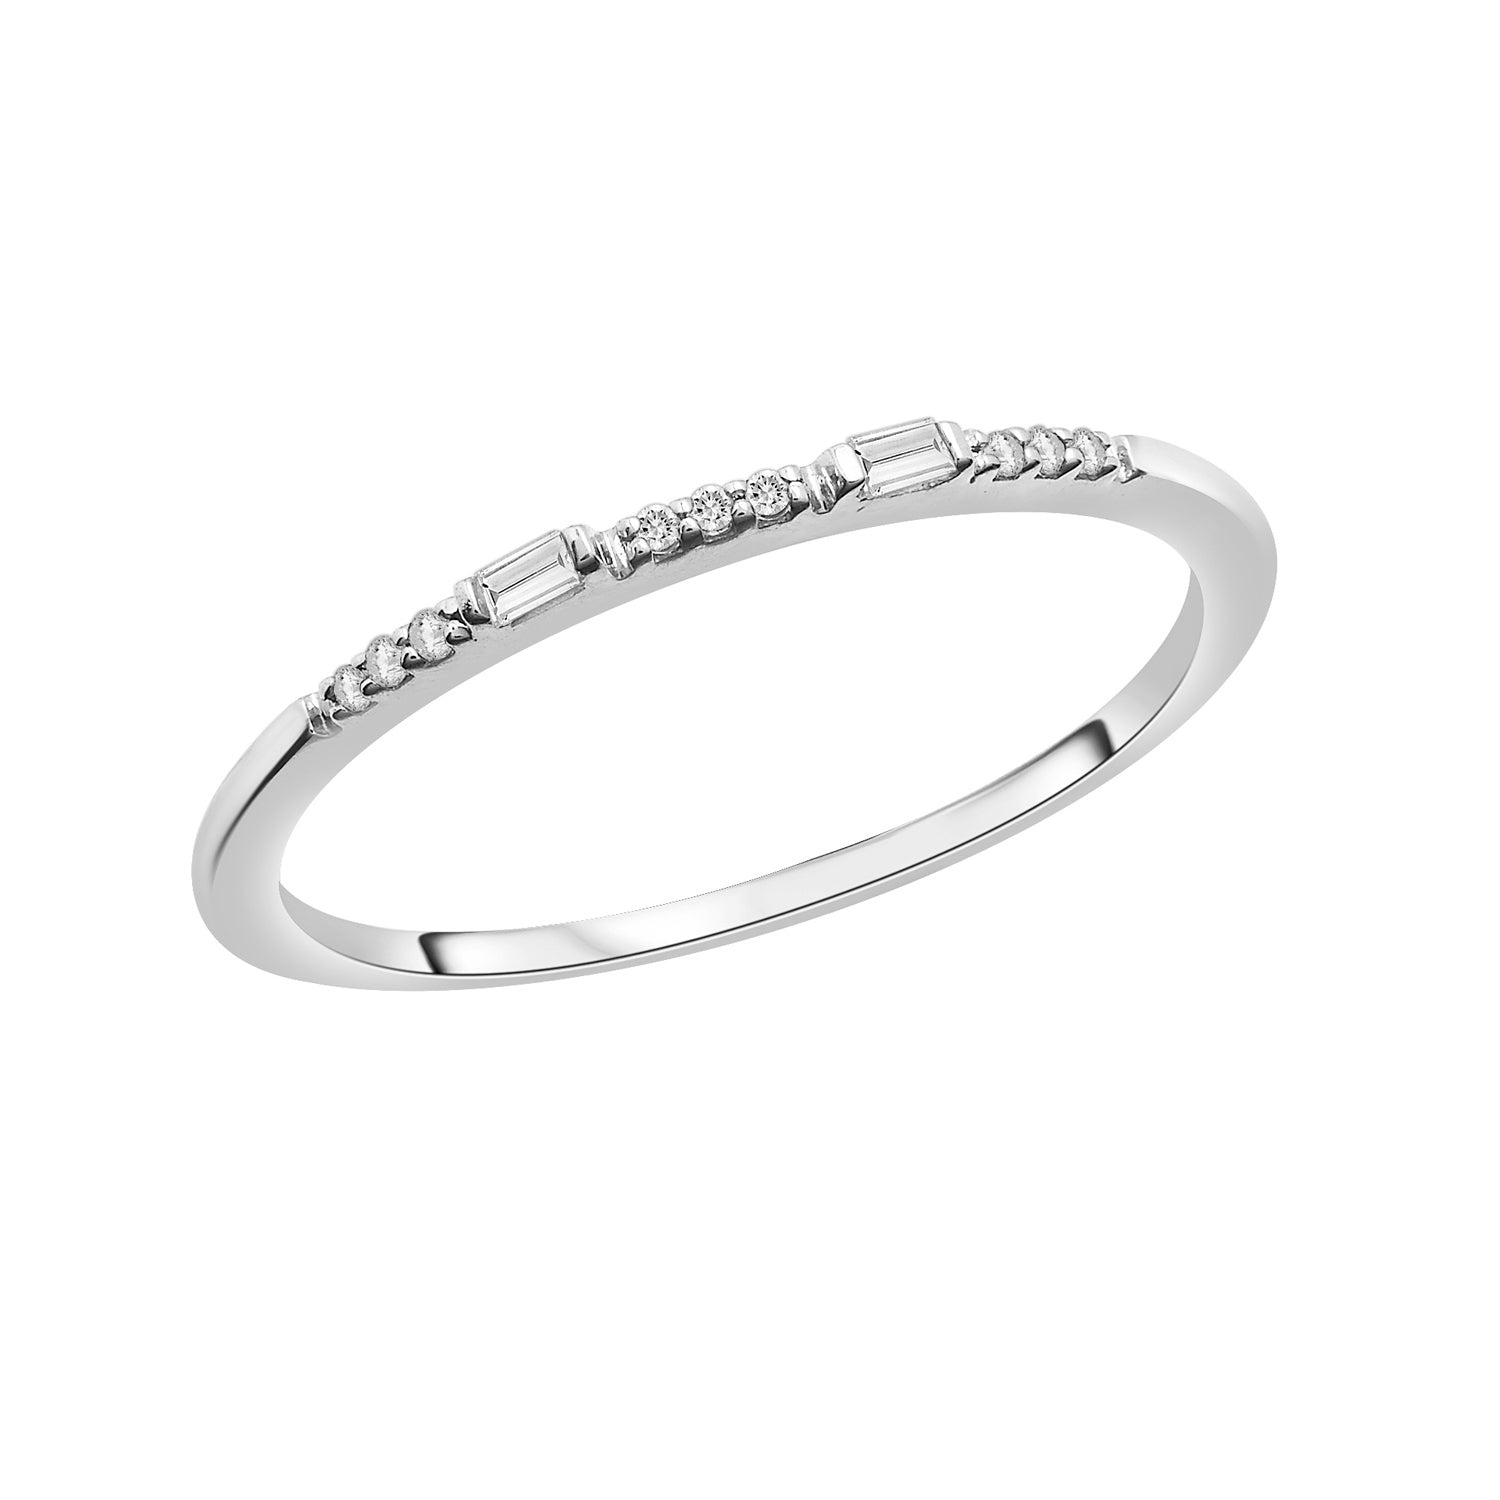 Reese Linear Diamond Ring in White Gold